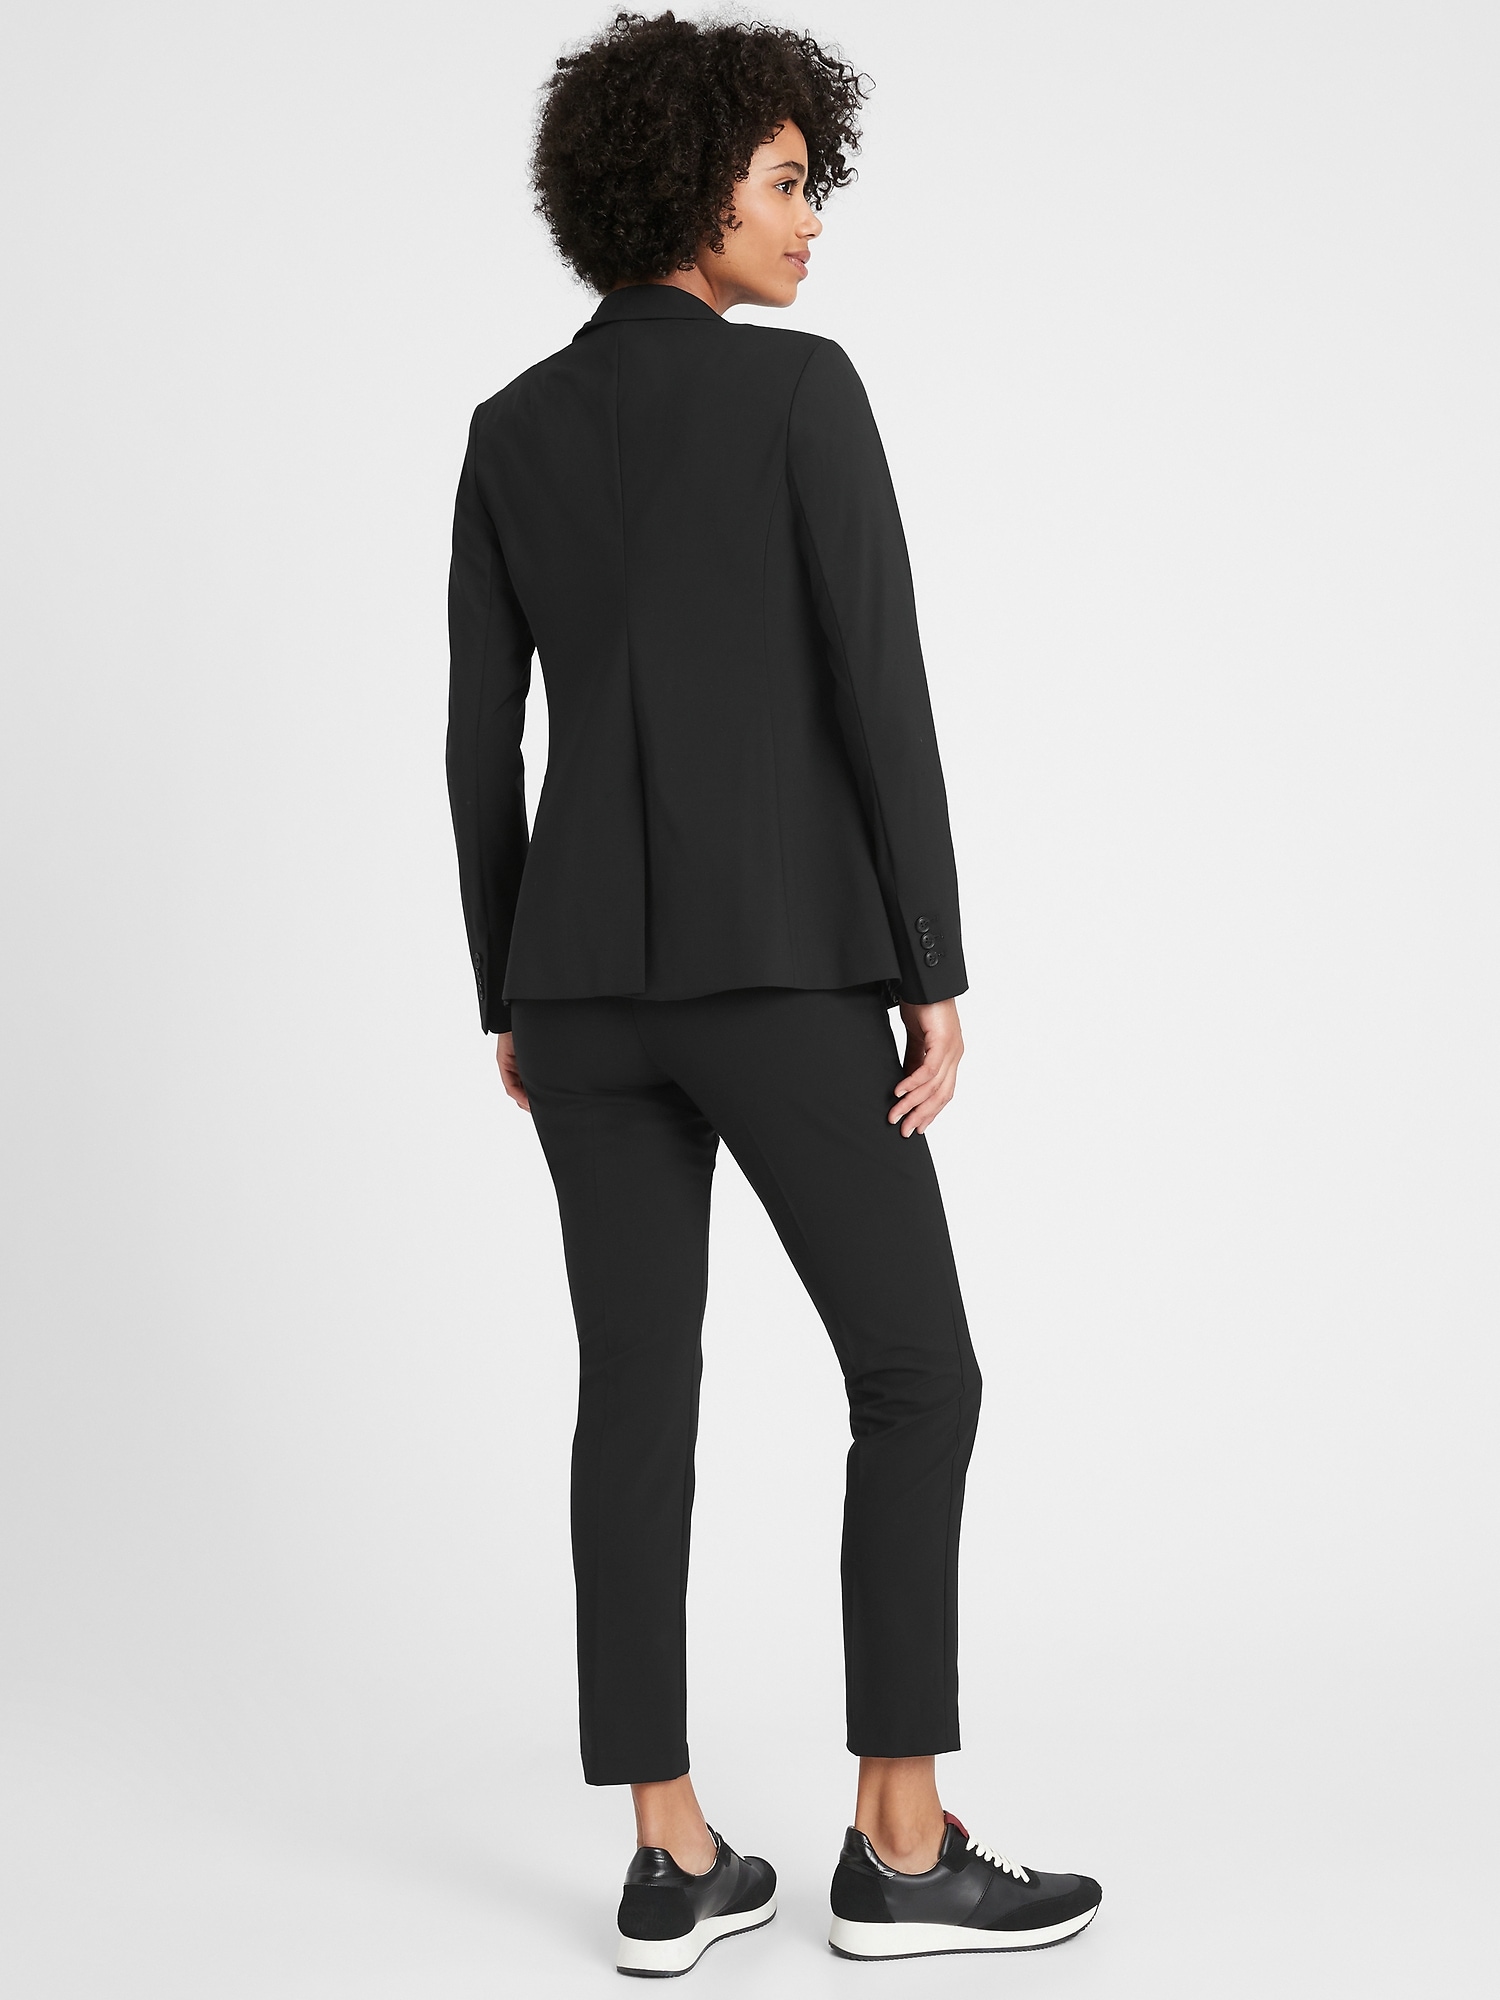 Details about   BANANA REPUBLIC $198 BLACK LONG AND LEAN FIT LIGHTWEIGHT WOOL BLAZER JACKET 2 P 